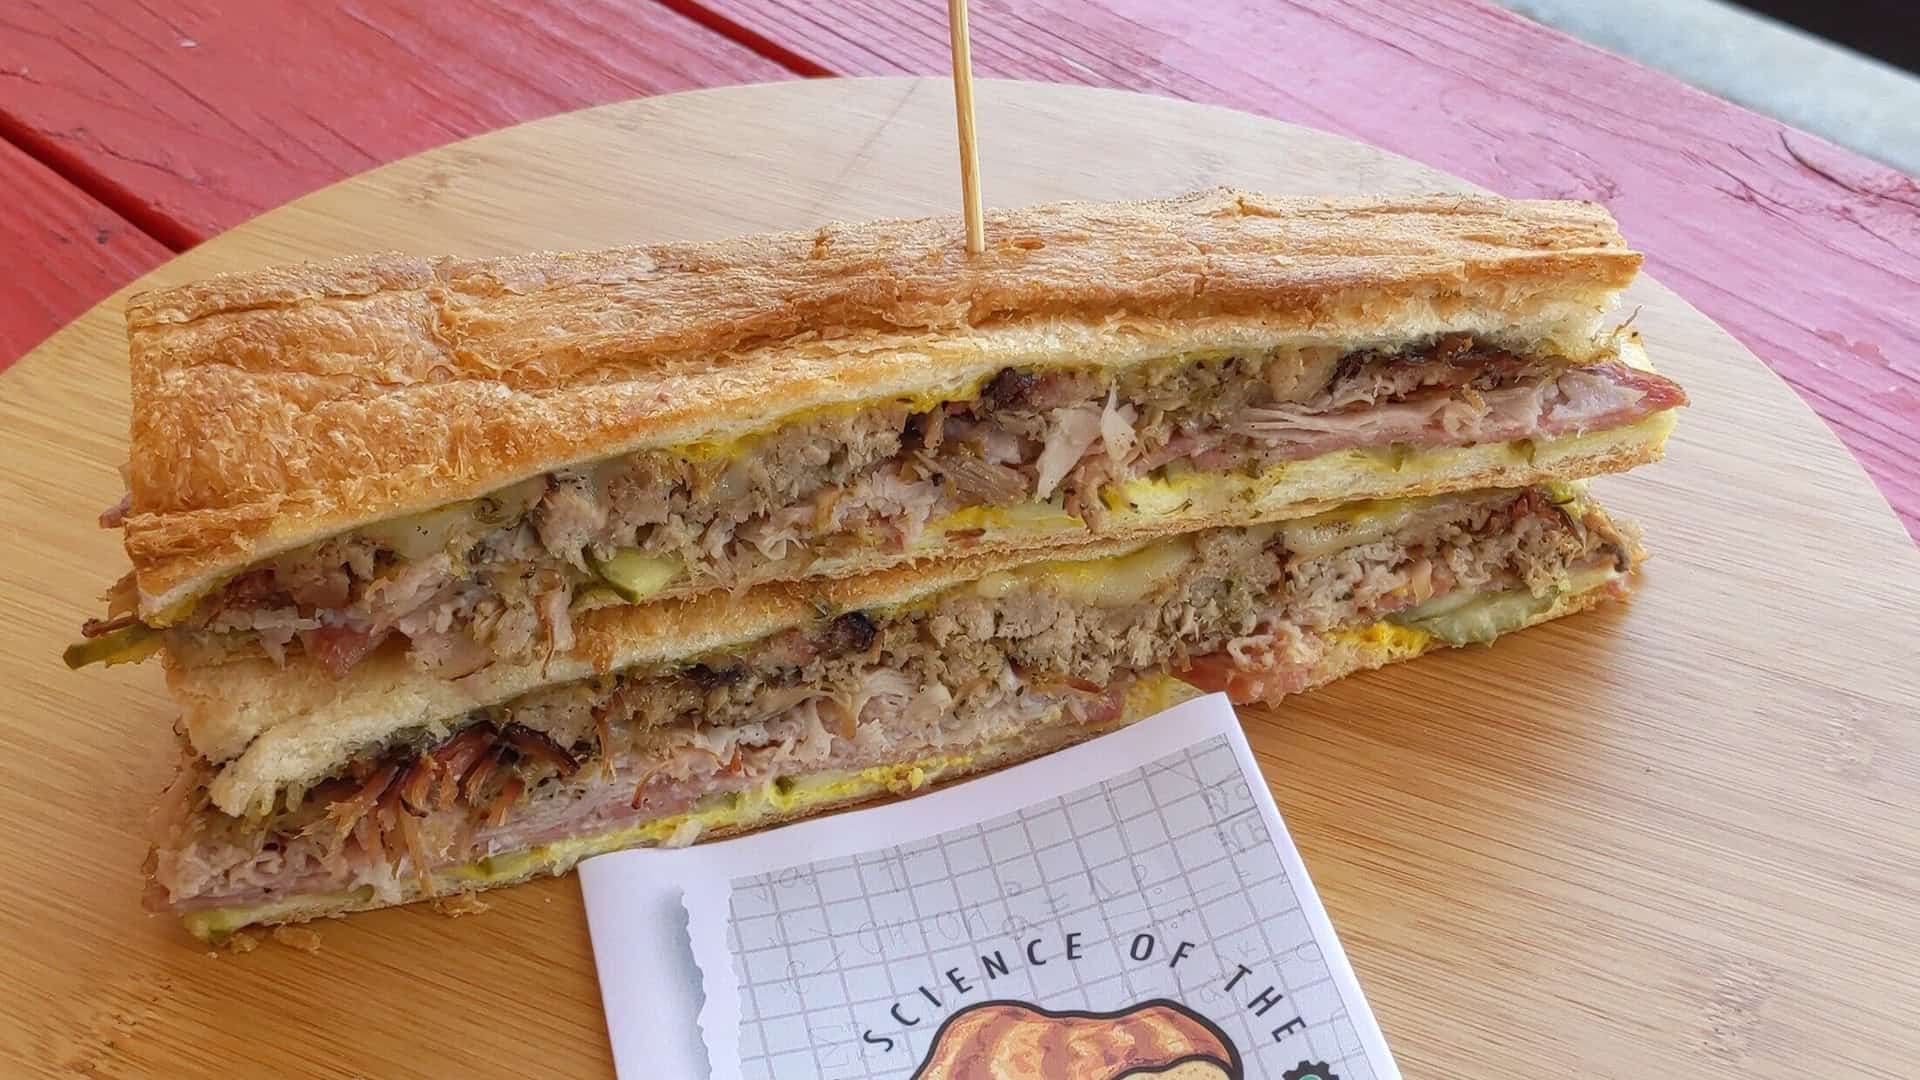 The Cuban Sandwich event, a favorite in Popular Science, makes a comeback this autumn